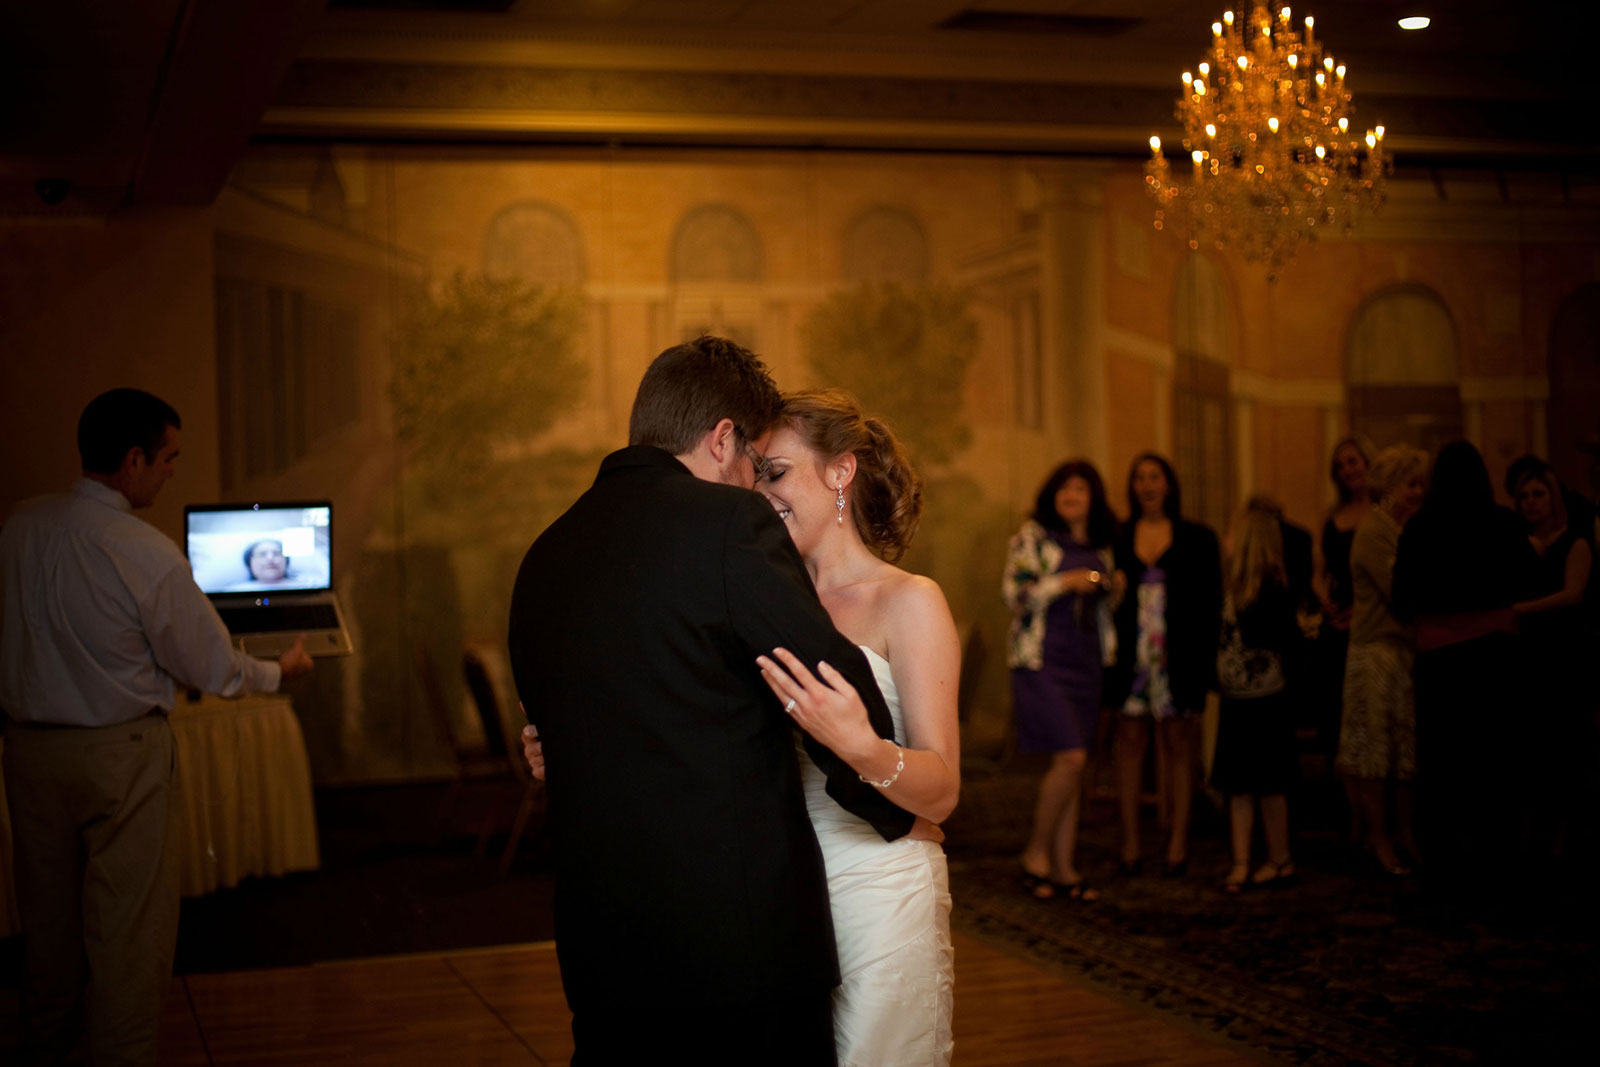 34. A terminally ill mother watched her daughters first dance over Skype